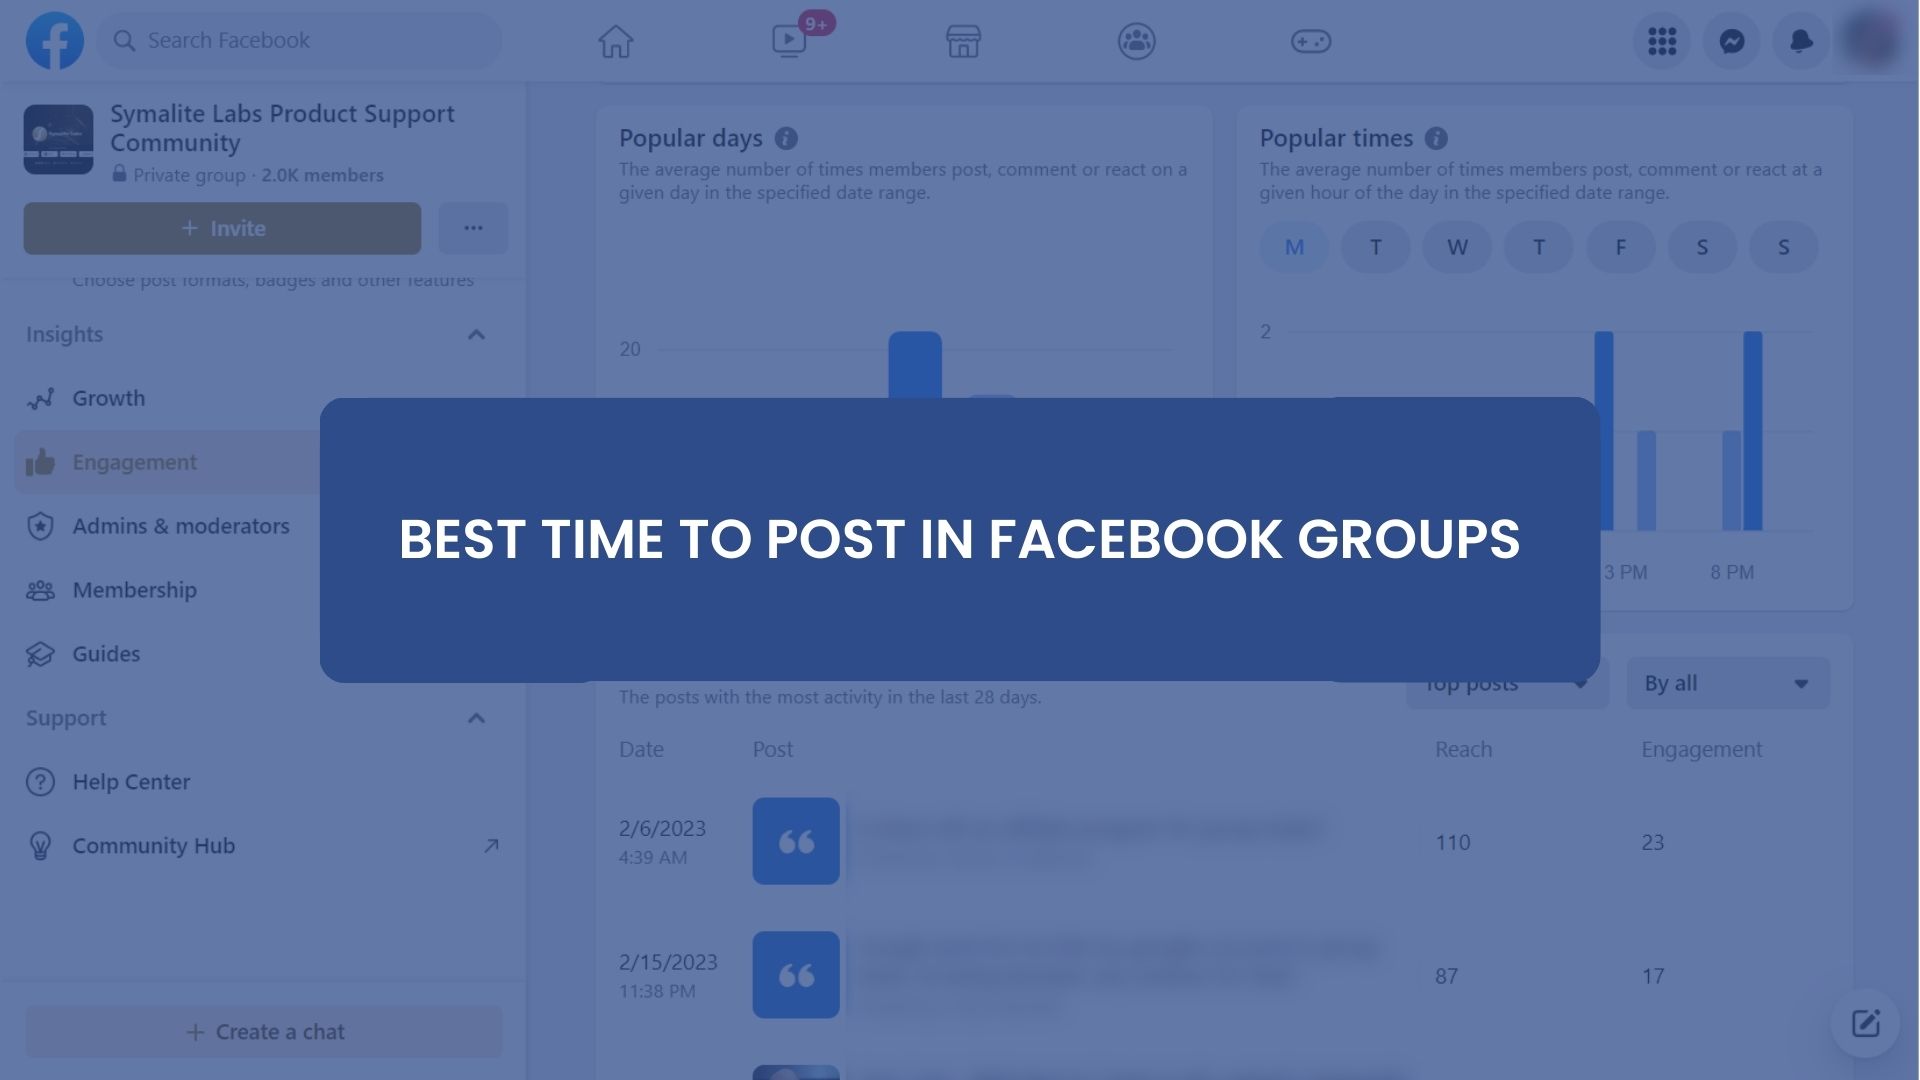 Best Time to Post in Facebook Groups